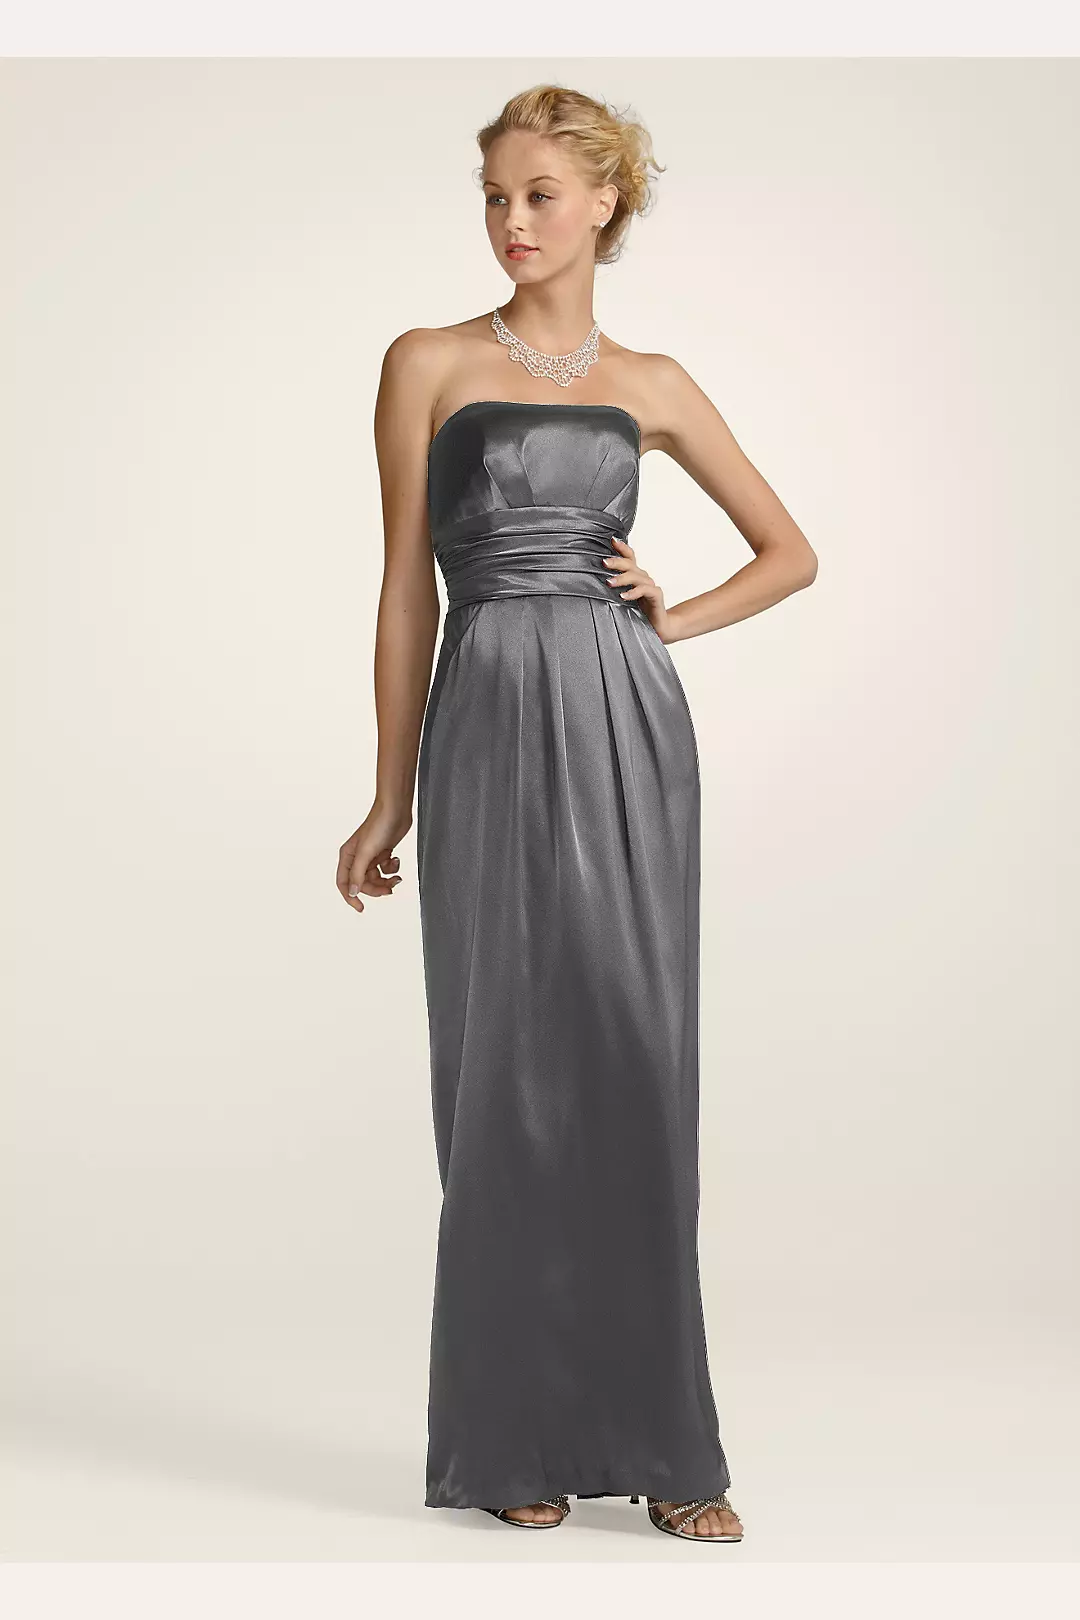 Strapless Slim Charmeuse Gown with Ruched Waist | David's Bridal